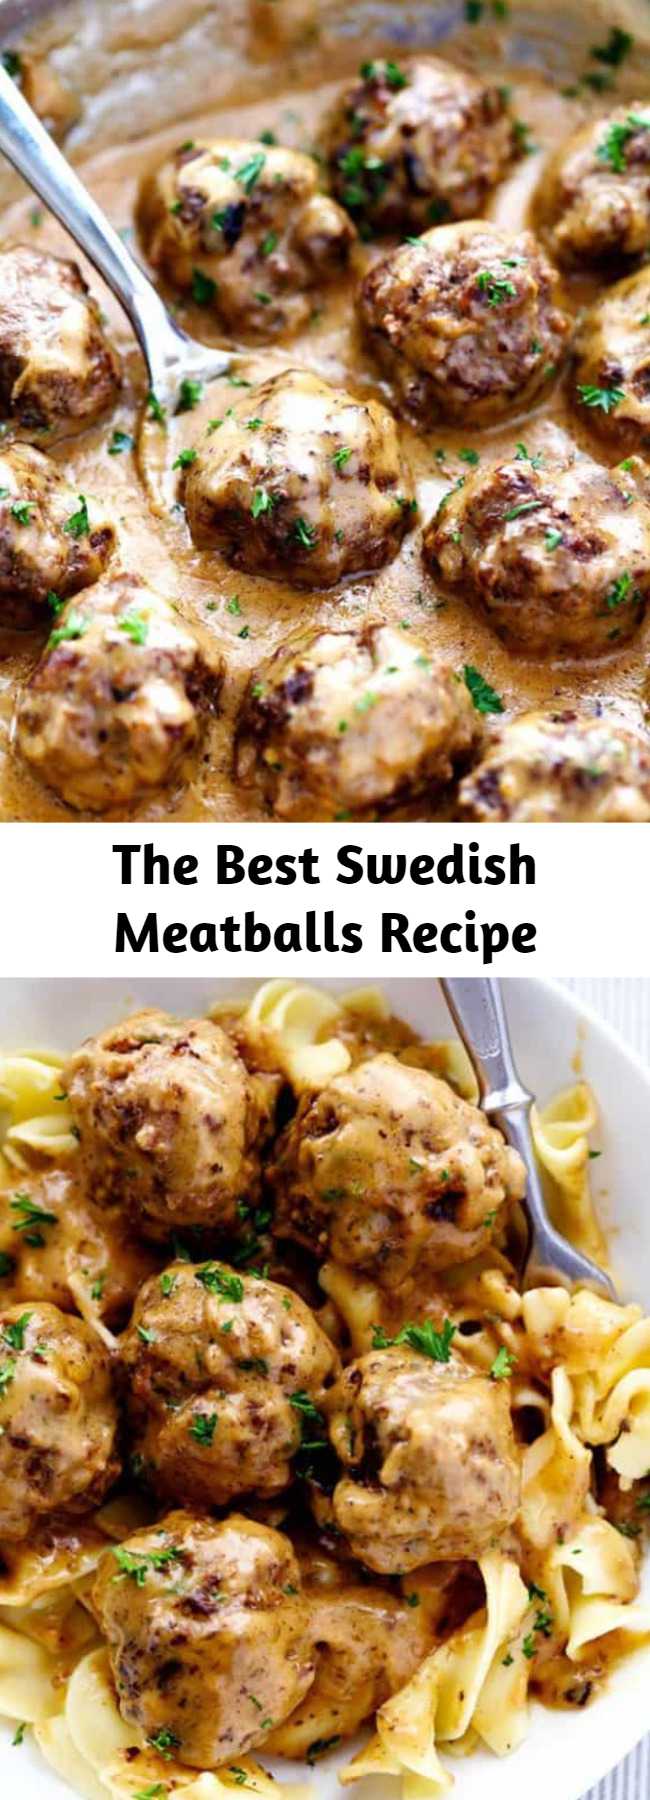 The Best Swedish Meatballs Recipe - The Best Swedish Meatballs are smothered in the most amazing rich and creamy gravy. The meatballs are packed with such delicious flavor. Savory, comforting and smothered with a sauce that melts in your mouth. You will quickly agree these are the BEST you have ever had!